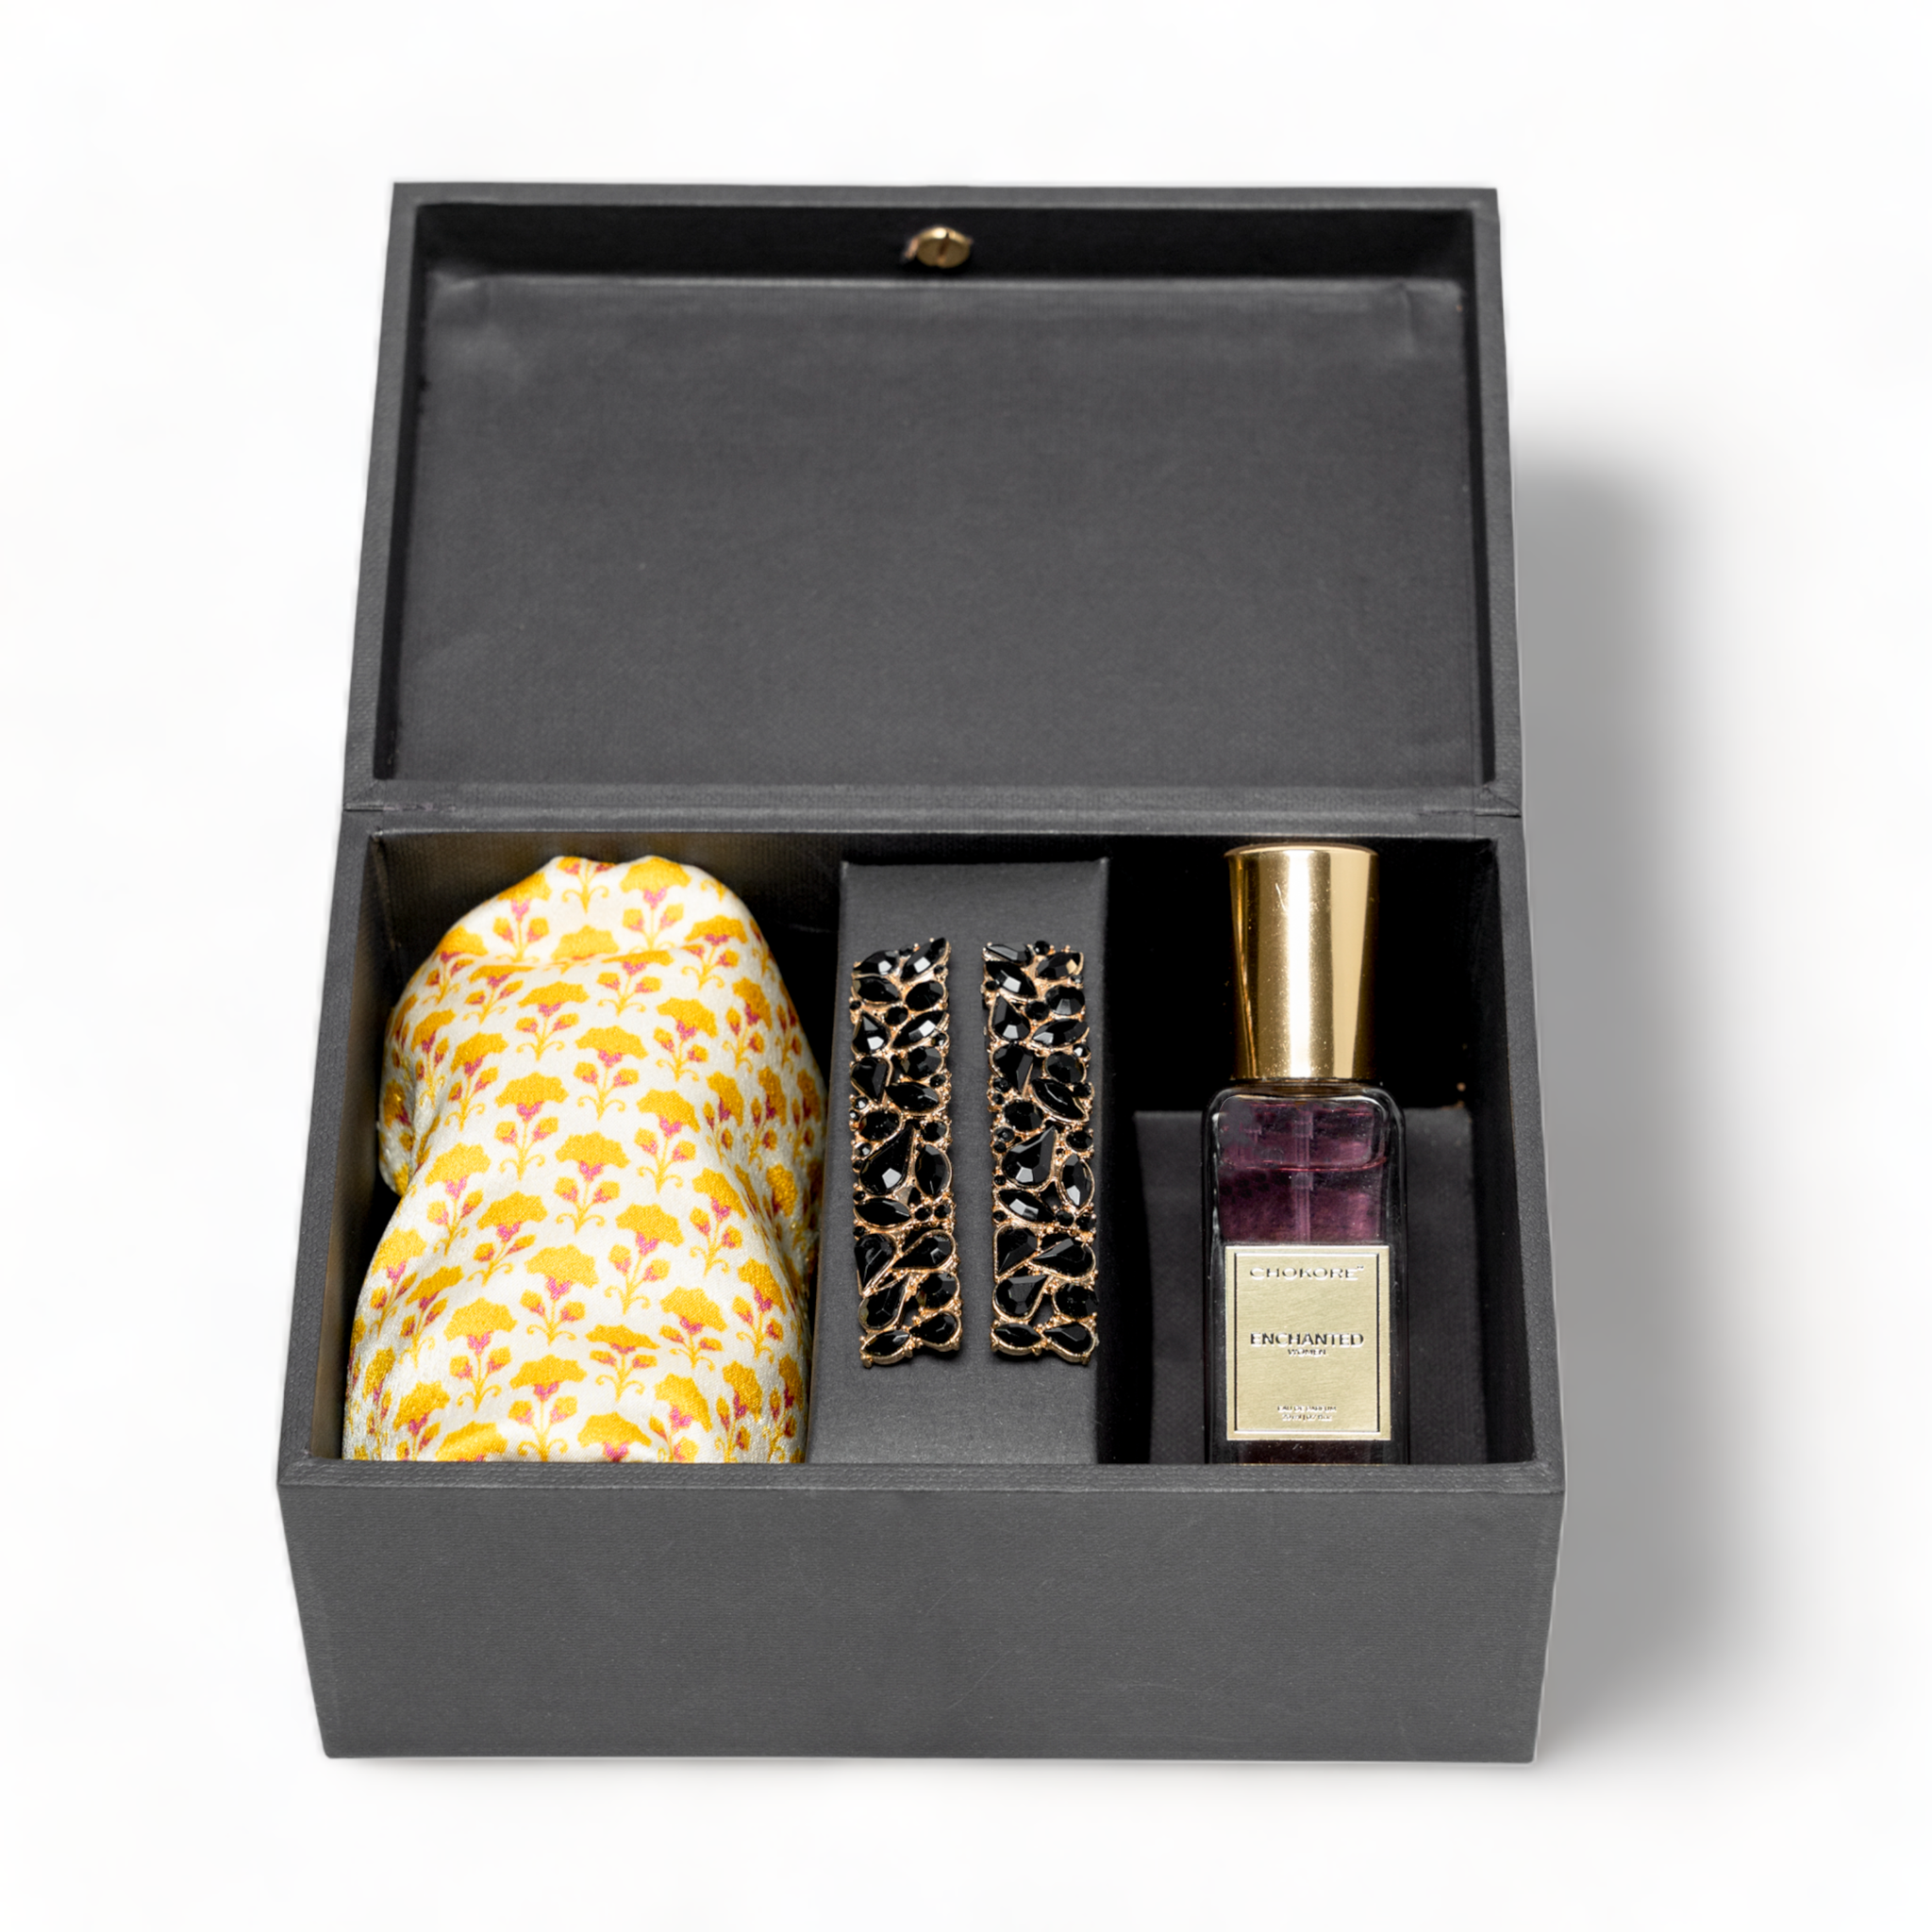 Chokore Special 3-in-1 Gift Set for Her (Silk Scarf, 20 ml Enchanted Perfume, & Black Dangle Earrings)